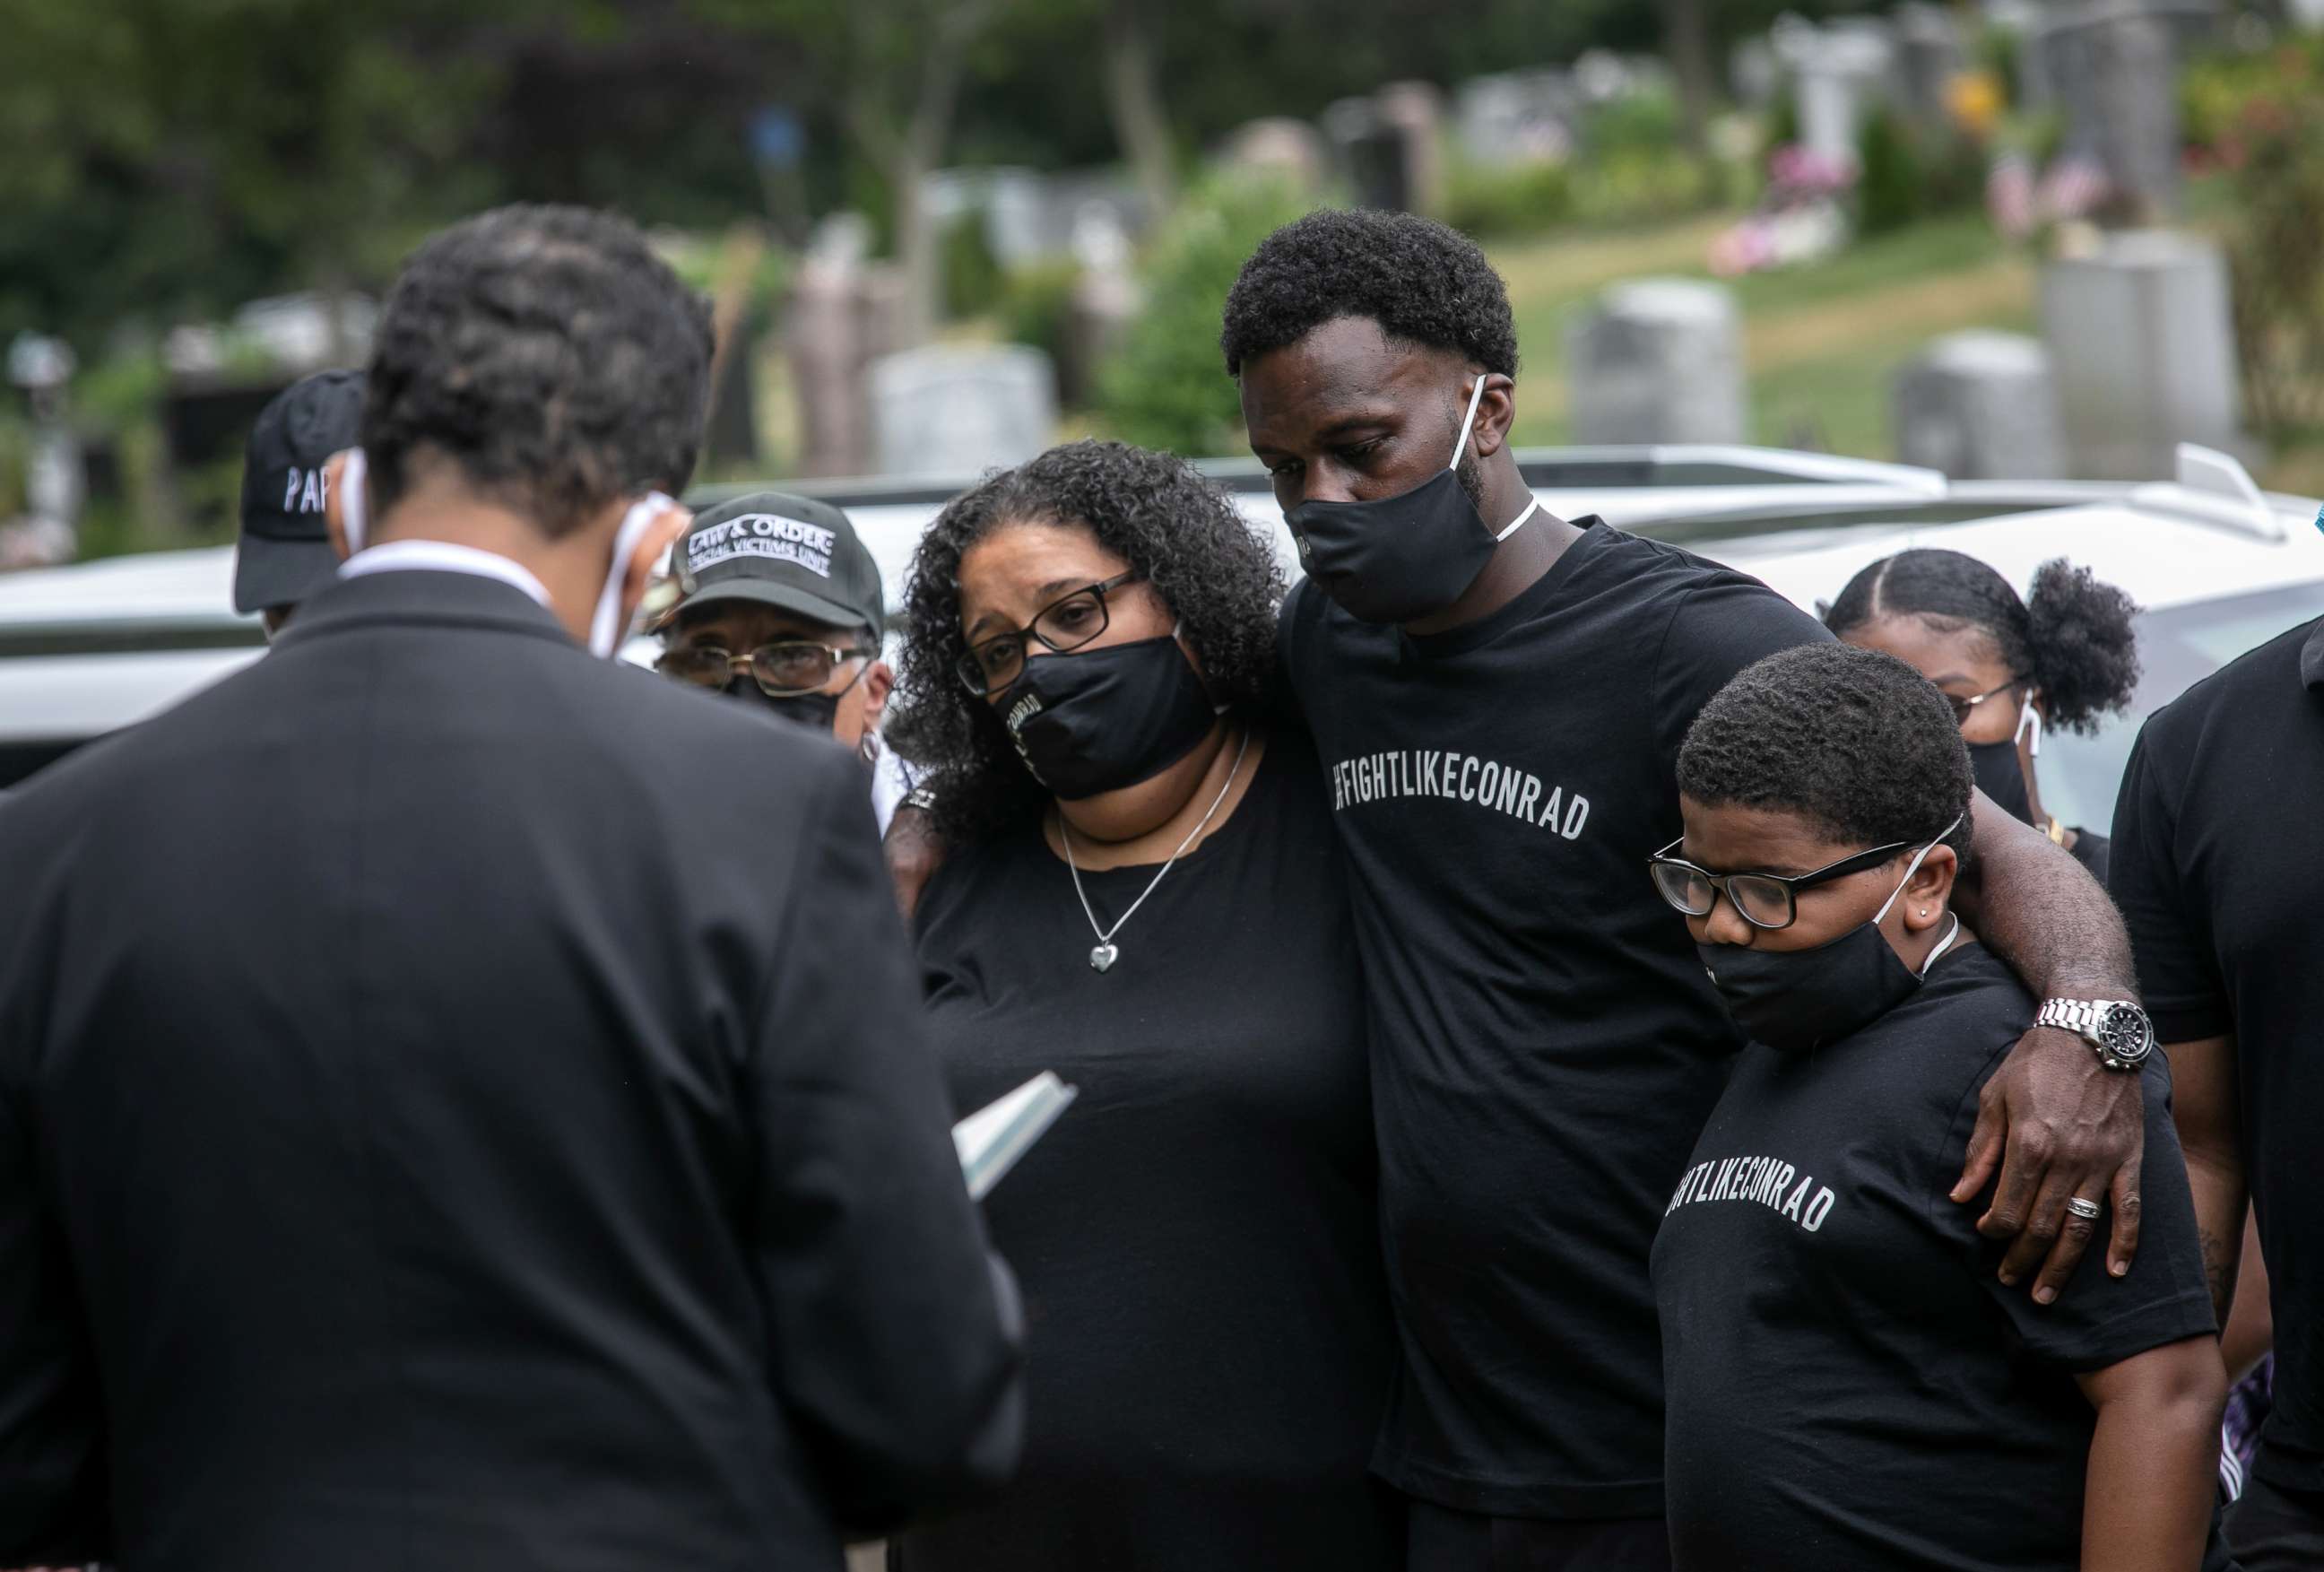 PHOTO: Maryann Coleman mourns with family and friends during the burial of her husband Conrad Coleman Jr. on July 3, 2020 in Rye, N.Y. Coleman, 39, died of COVID-19 on June 20, 2020, just over two months after his father also died of the disease.